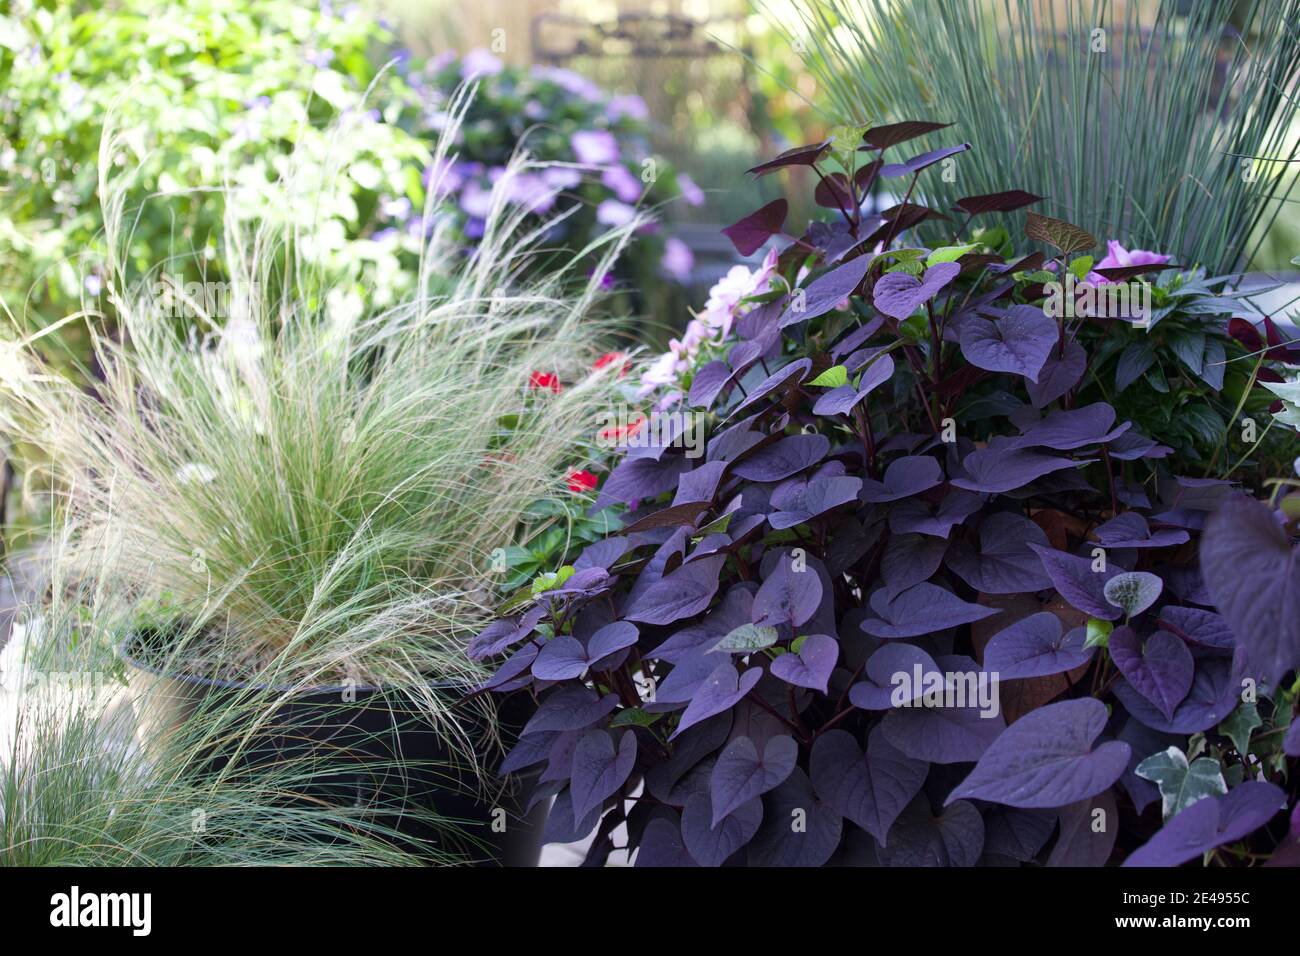 Sweet Potato Vine High Resolution Stock Photography And Images Alamy